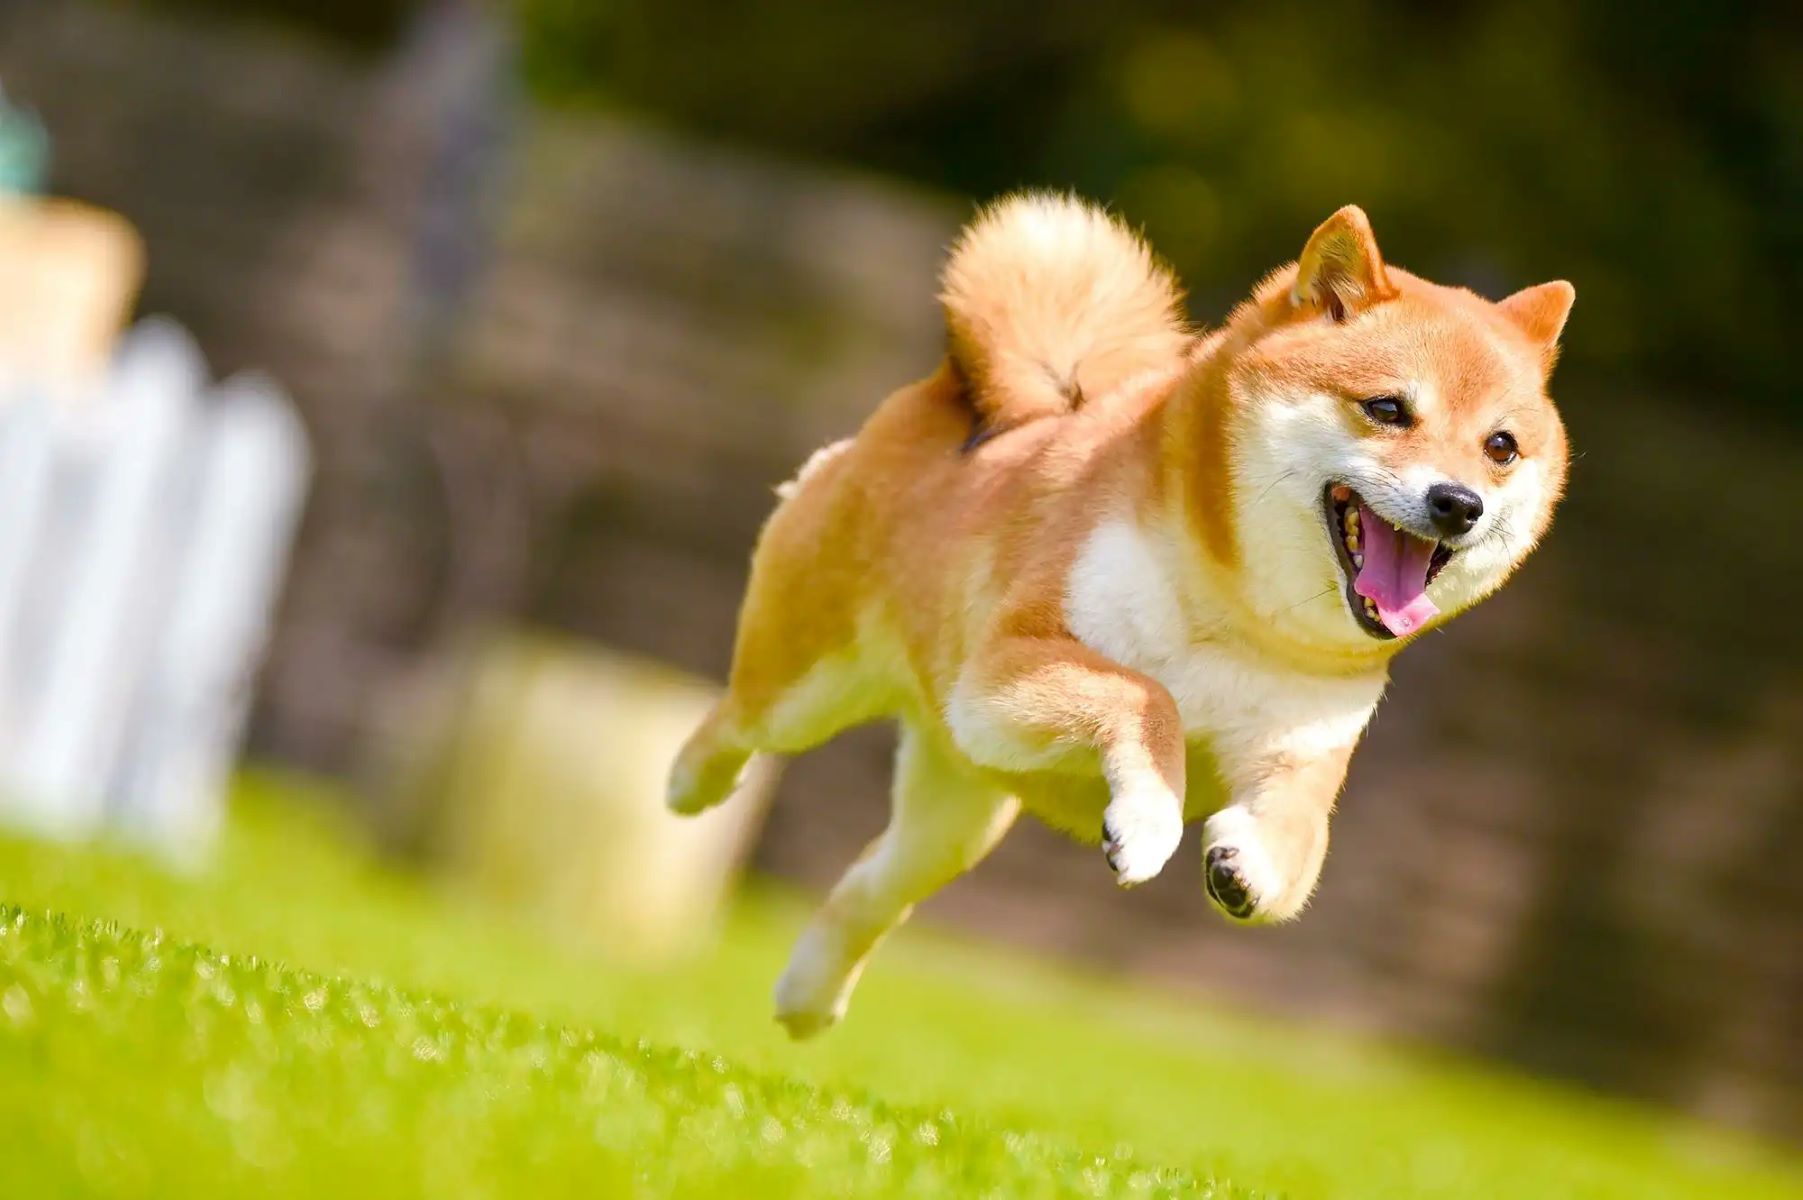 The Fascinating Secret Behind Japanese And Korean Dogs' Curly Tails!